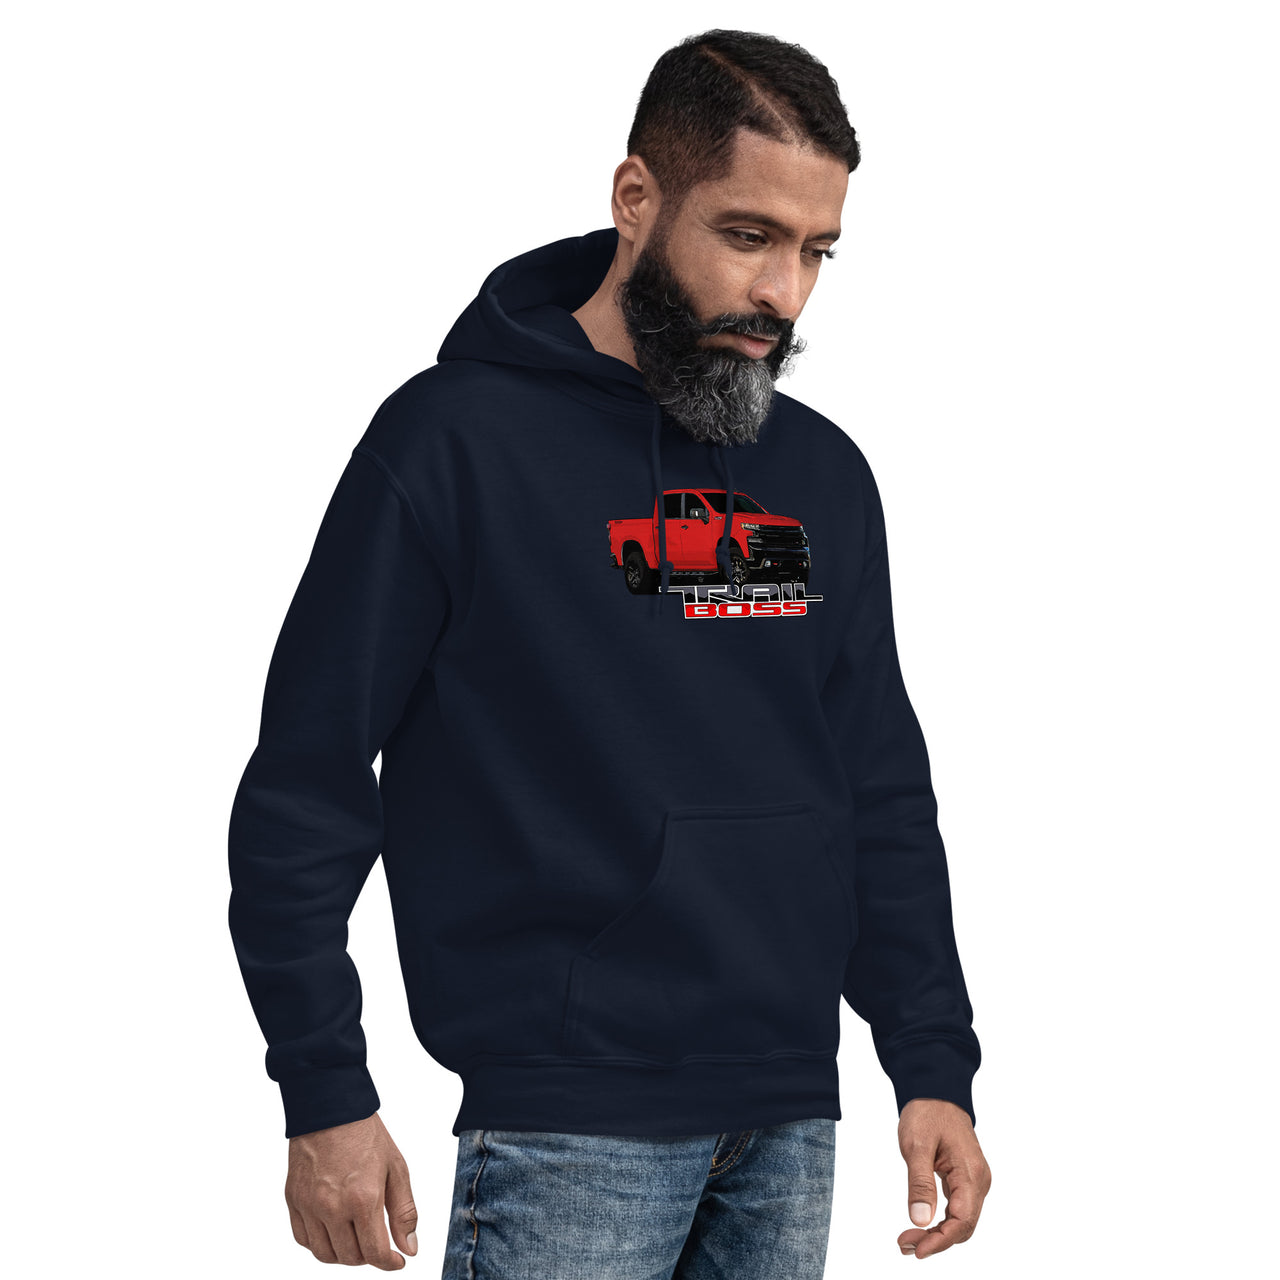 Red Trail Boss Truck Hoodie modeled in navy